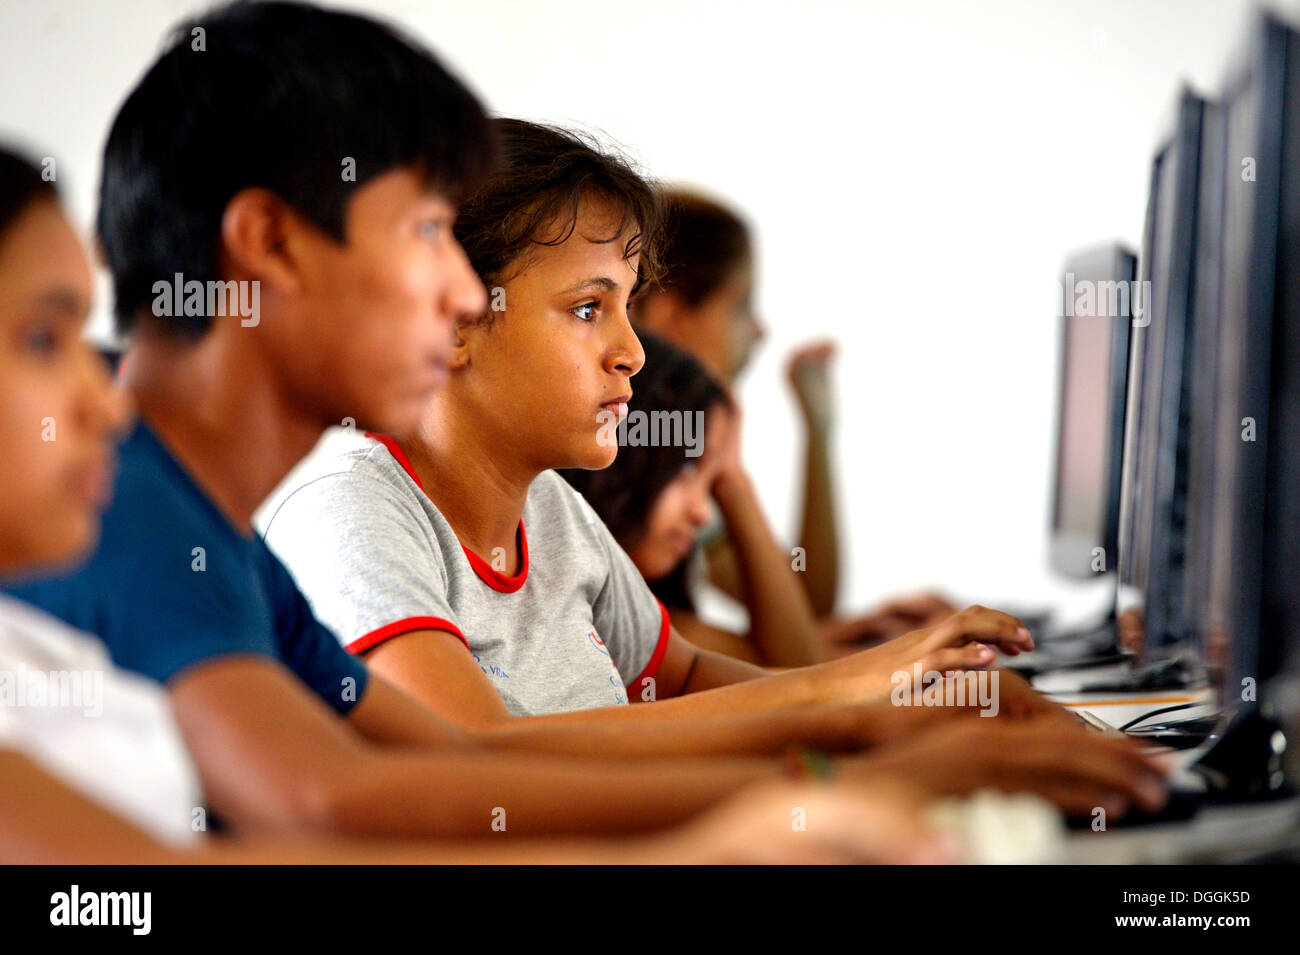 Computer science-lesson for young people, social project in a favela, Poxoréo, Mato Grosso, Brazil Stock Photo